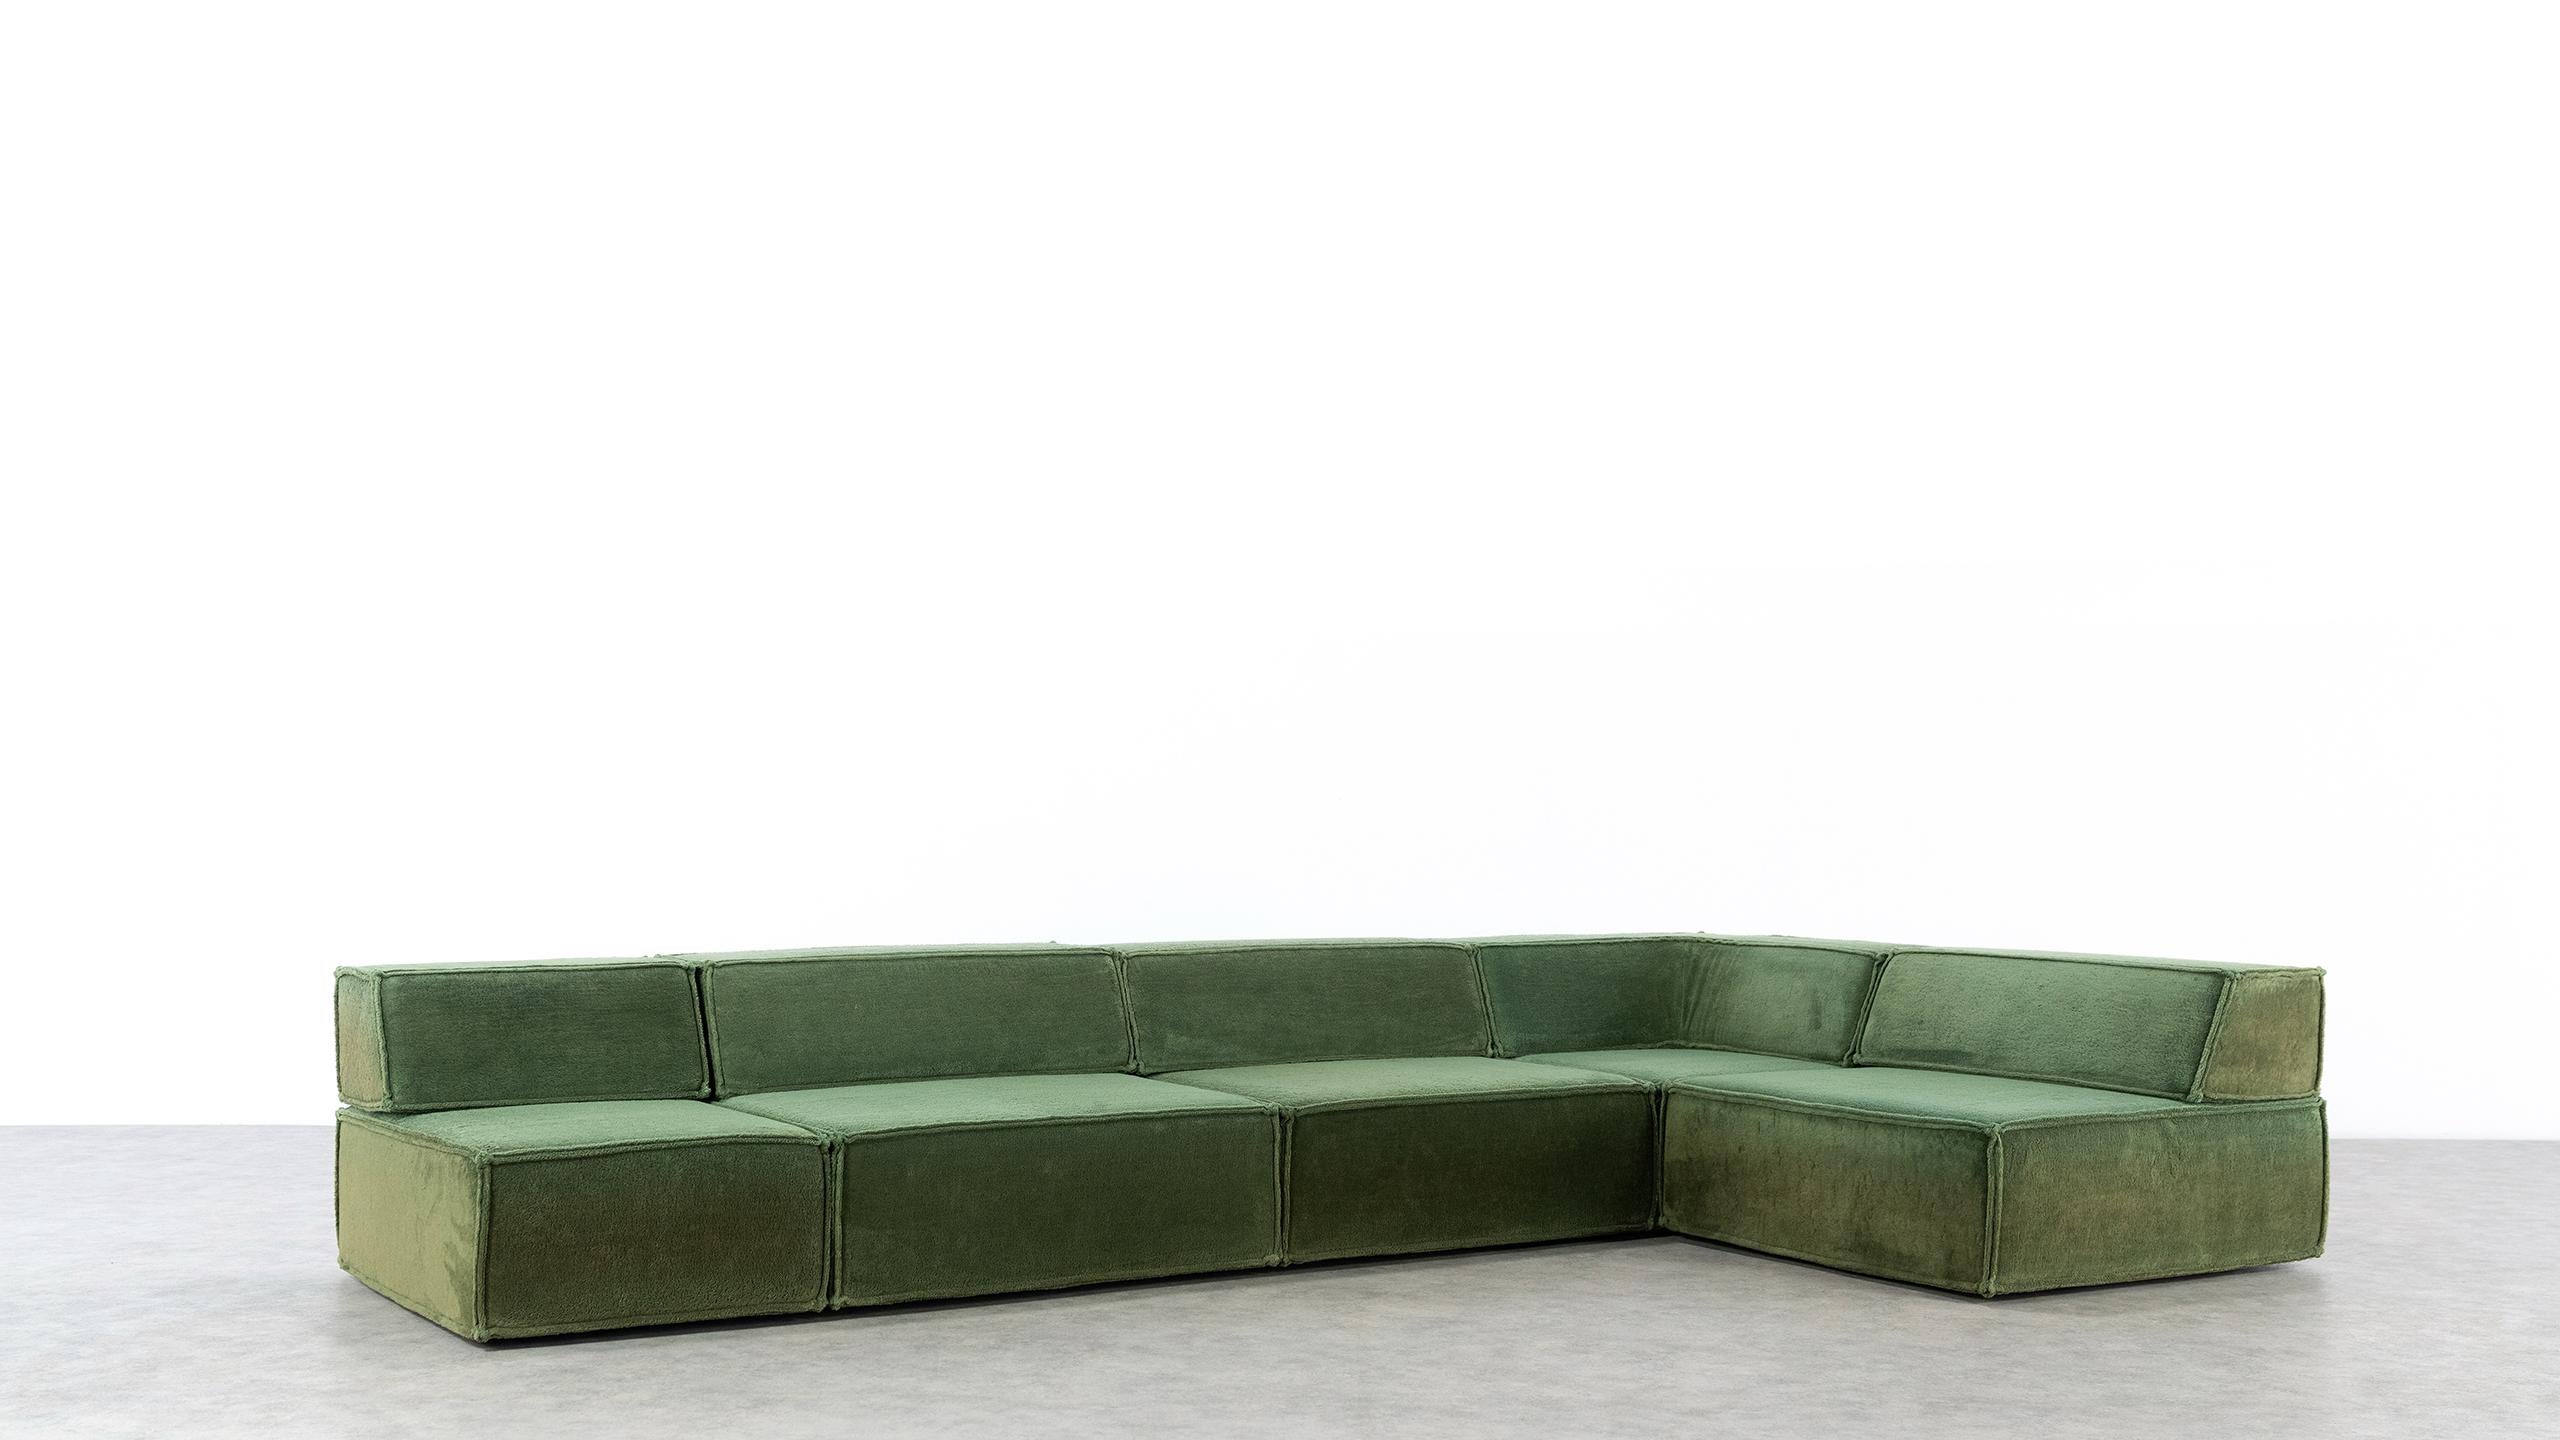 COR Trio Modular Sofa, Giant Landscape in Green, 1972 by Team Form AG, Swiss 9